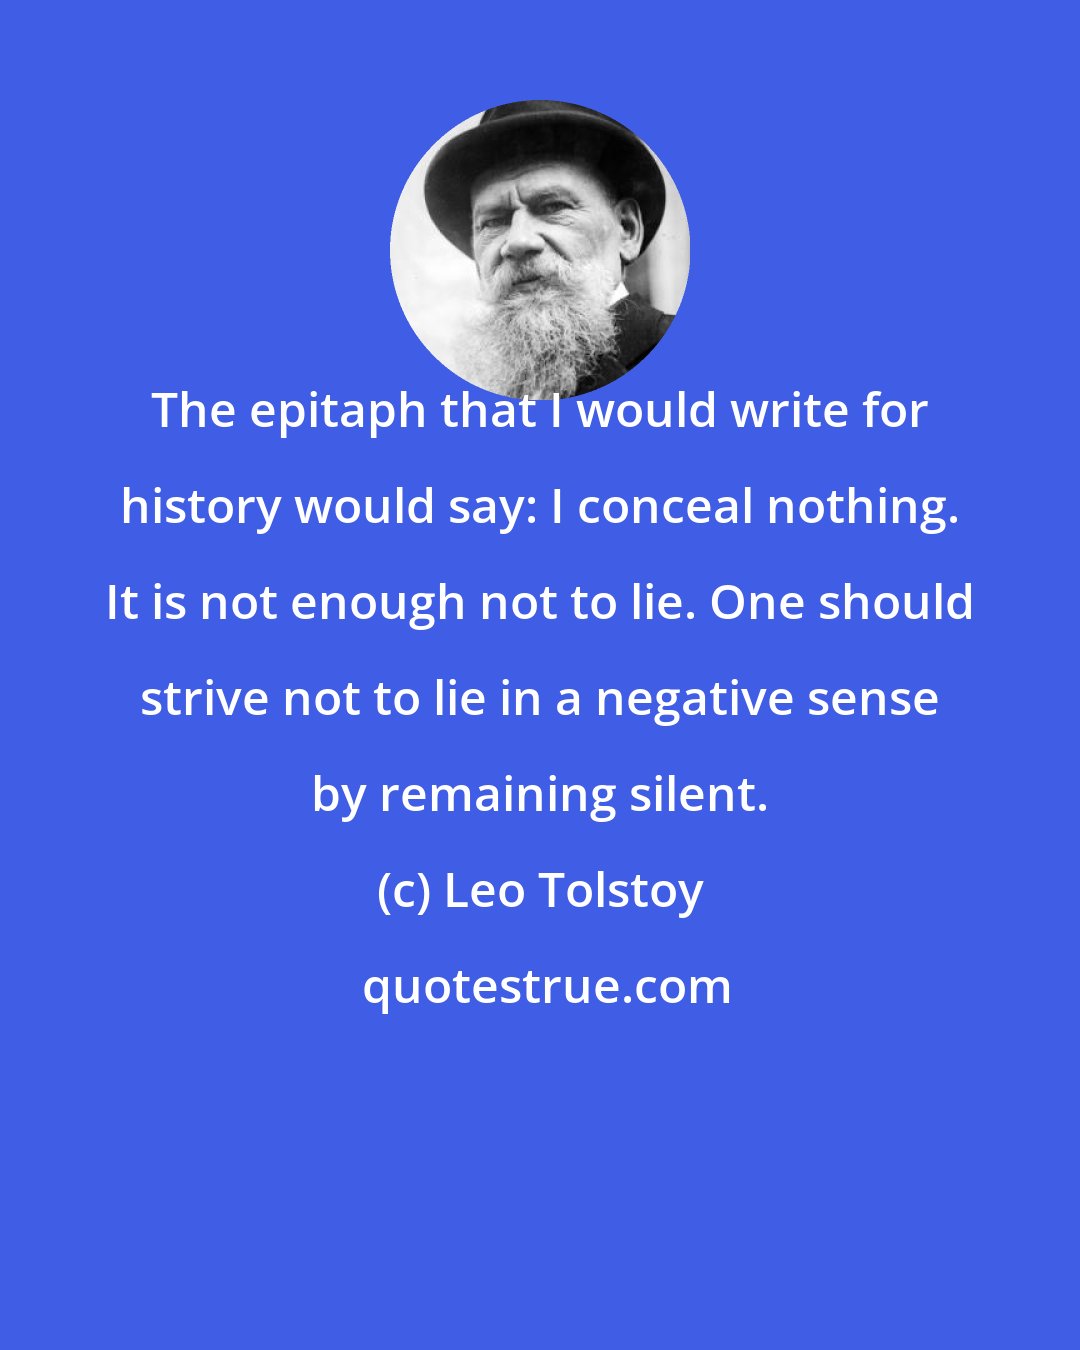 Leo Tolstoy: The epitaph that I would write for history would say: I conceal nothing. It is not enough not to lie. One should strive not to lie in a negative sense by remaining silent.